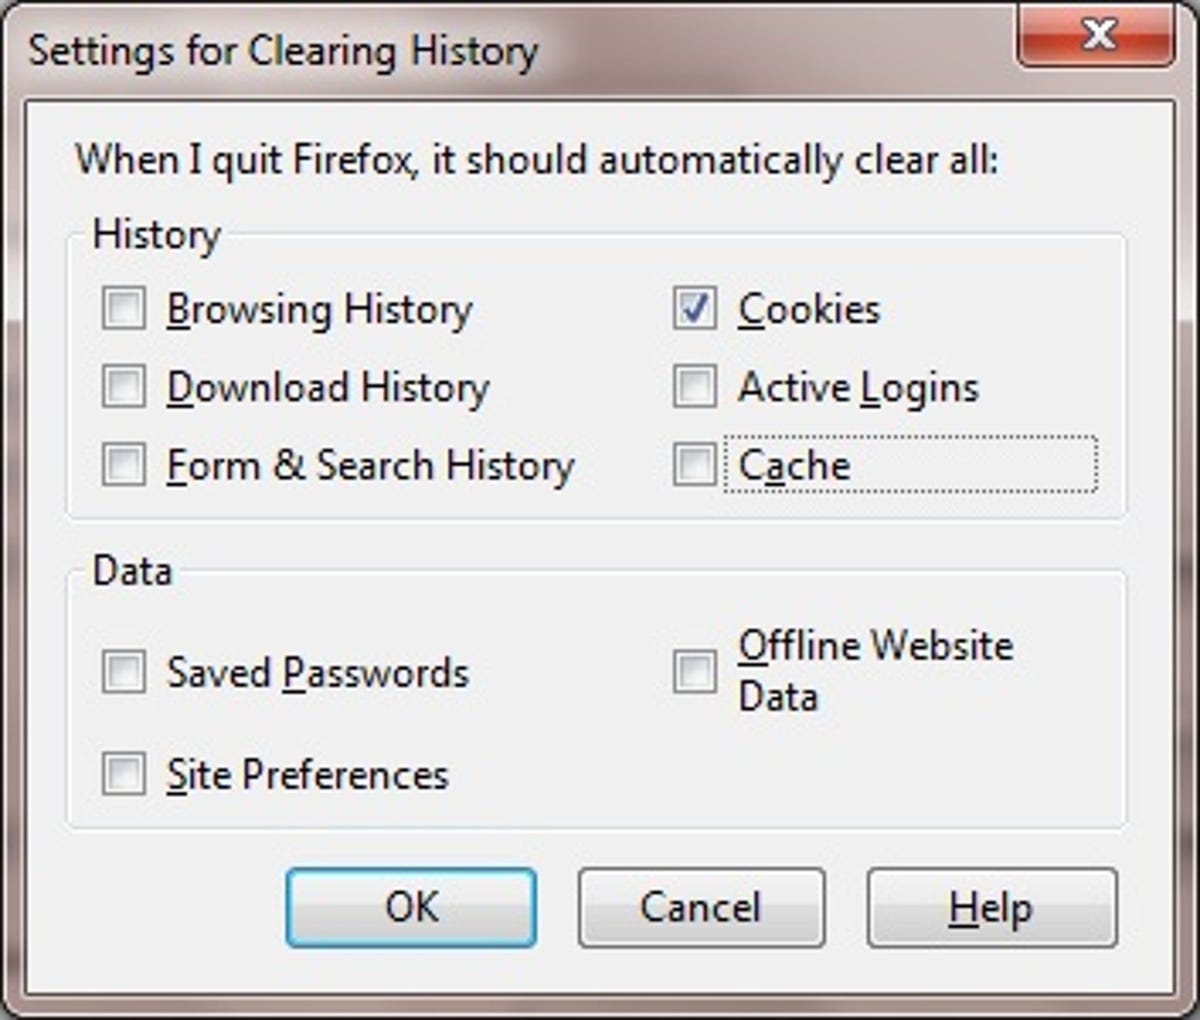 Mozilla Firefox Settings for Clearning History dialog box